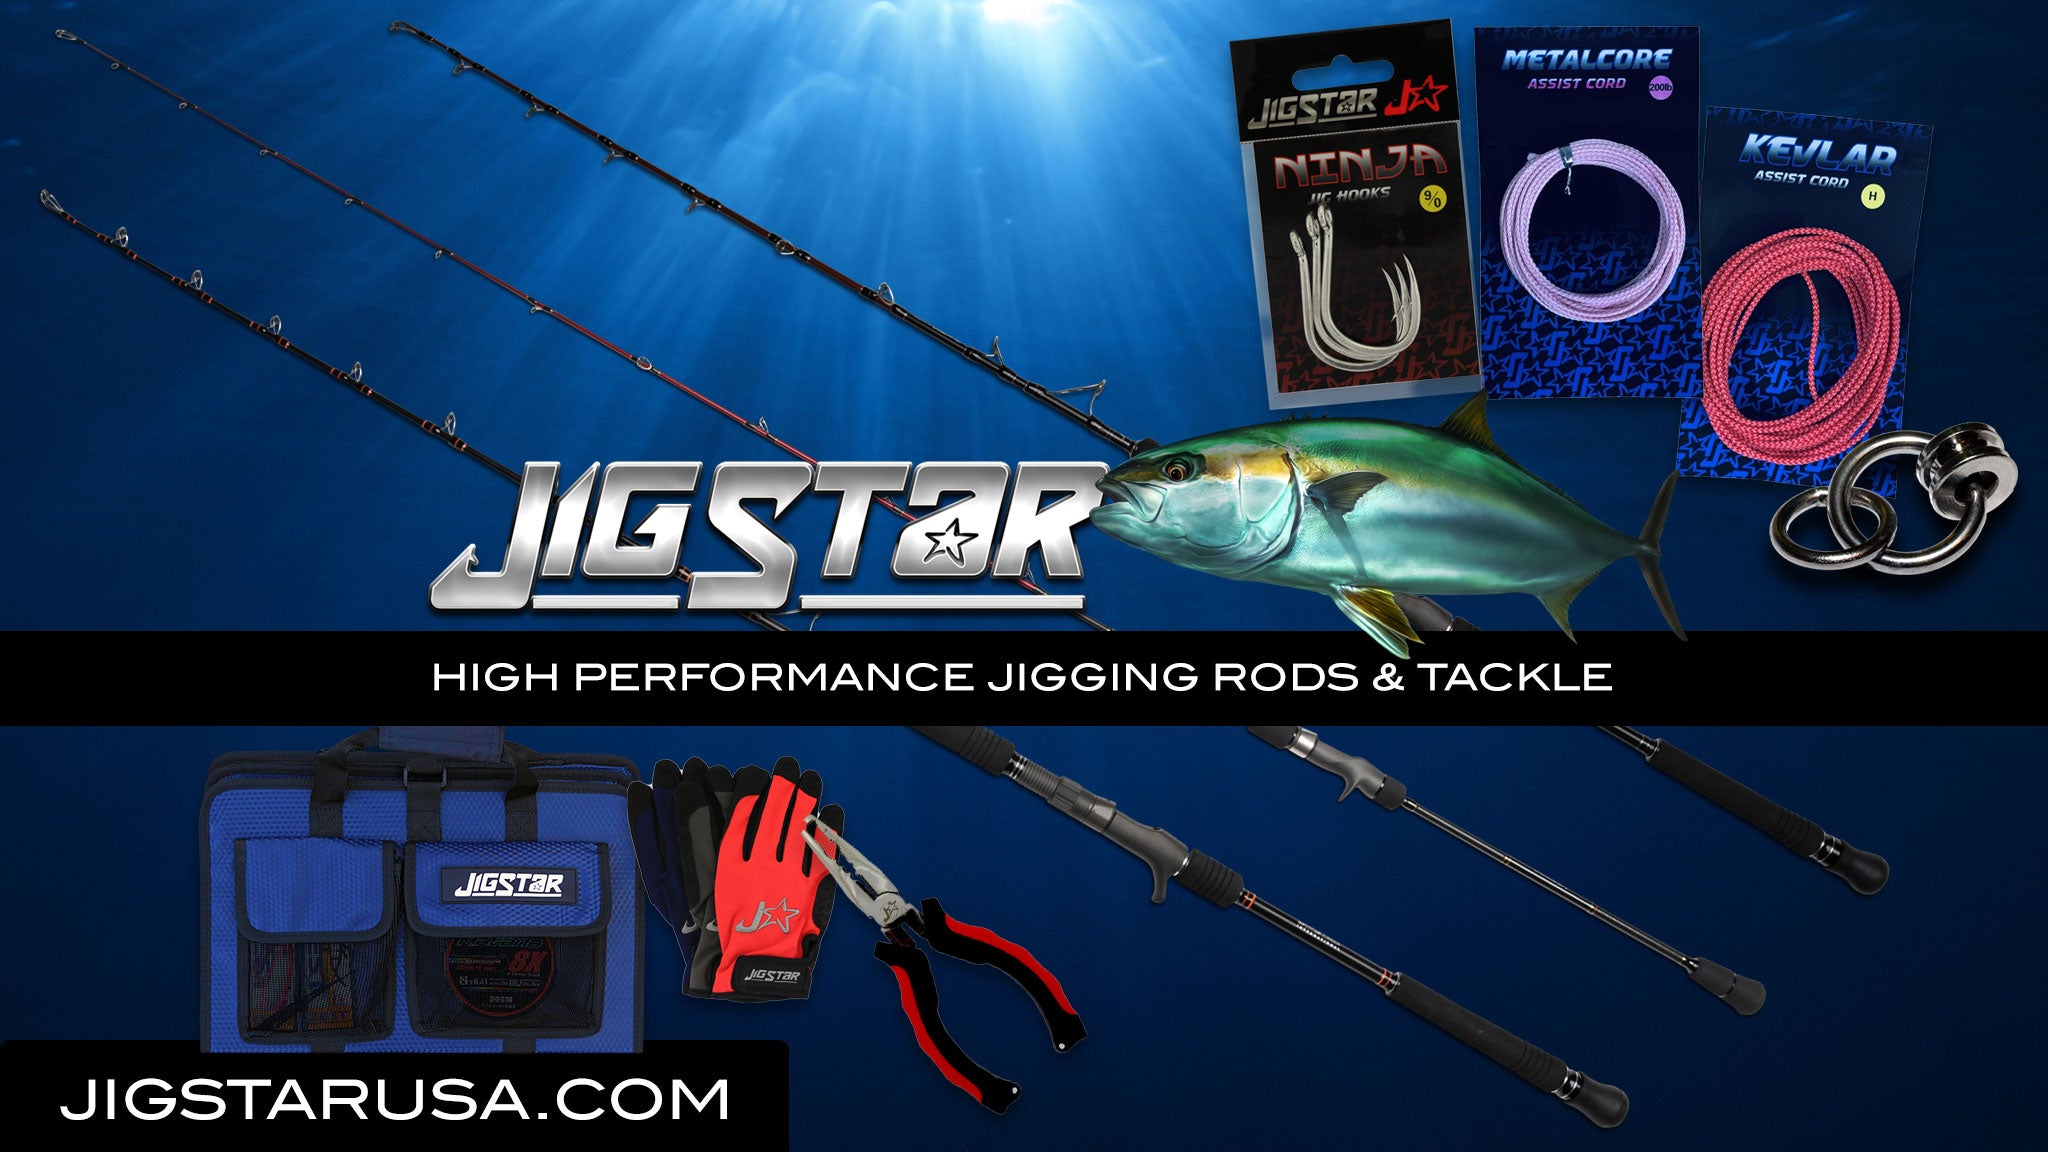 Buy Jig Star Metalcore Assist Cord 3m online at